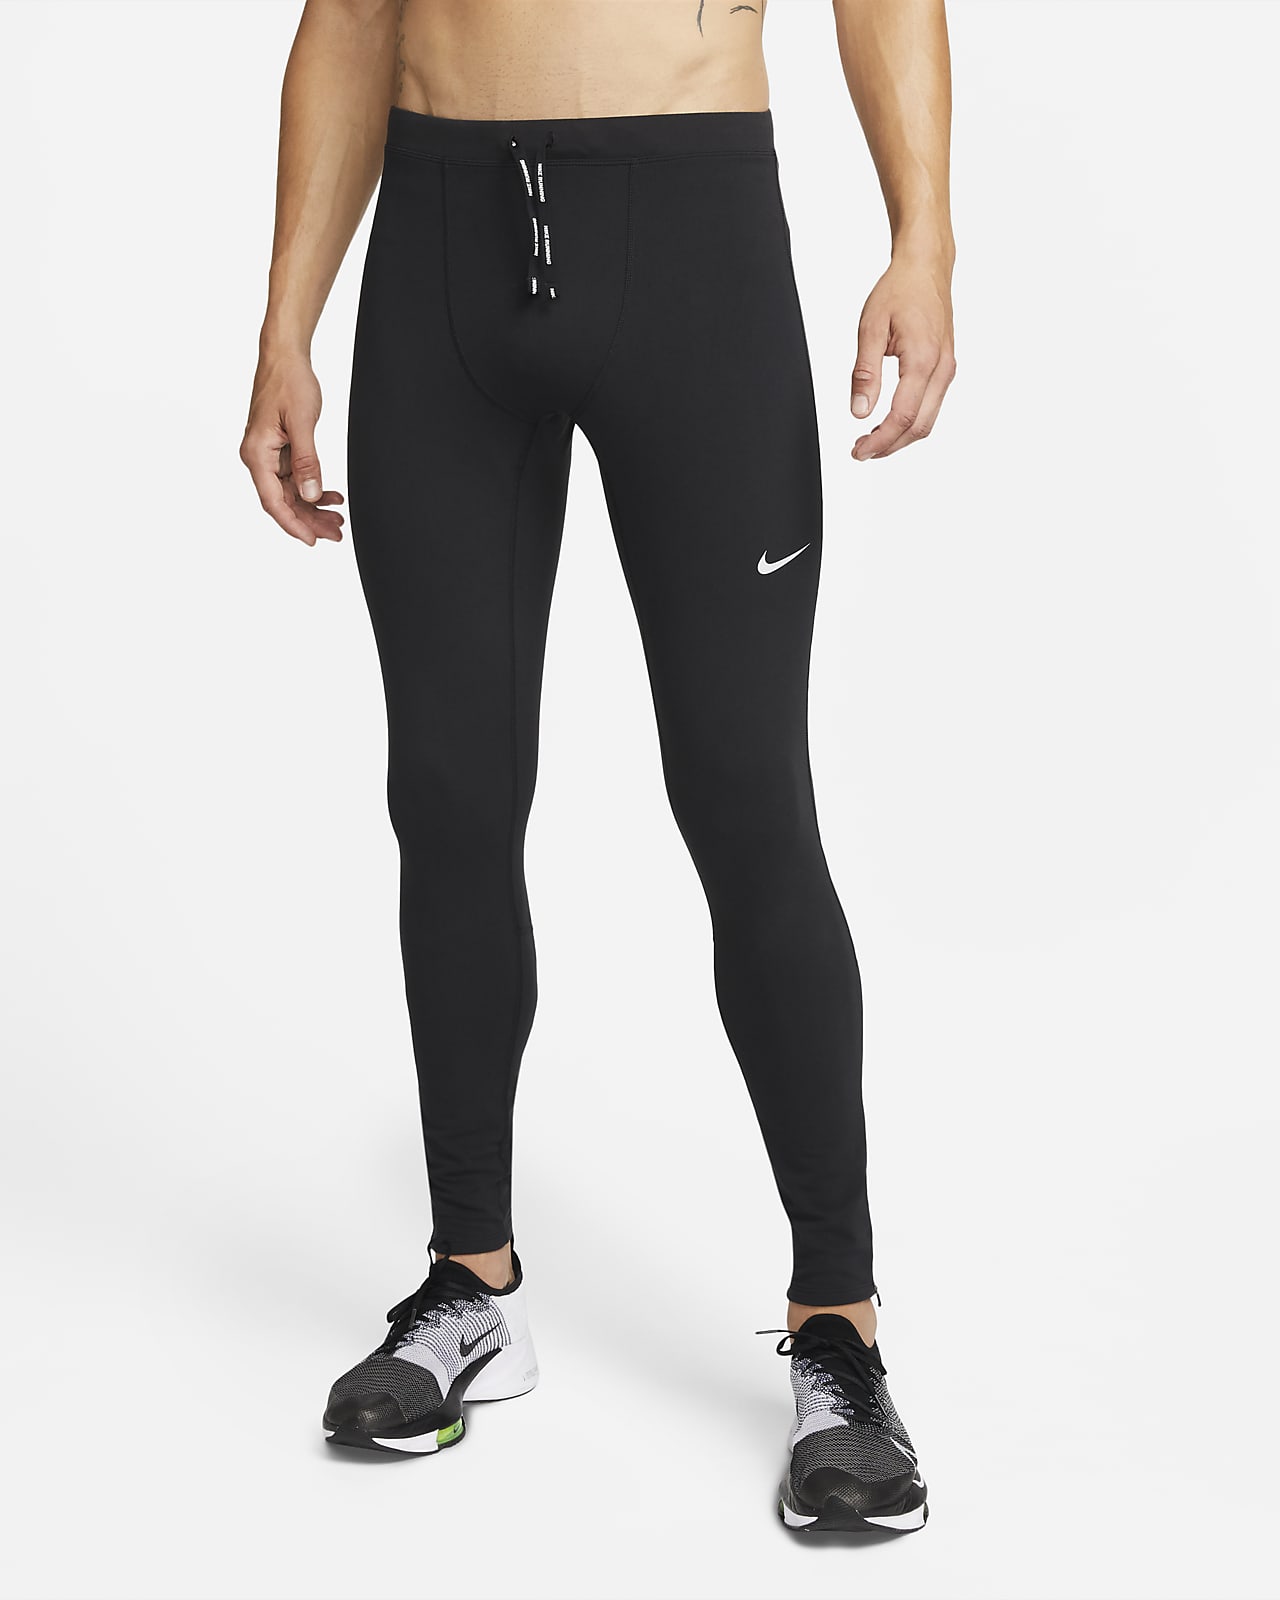 what are men's running tights for